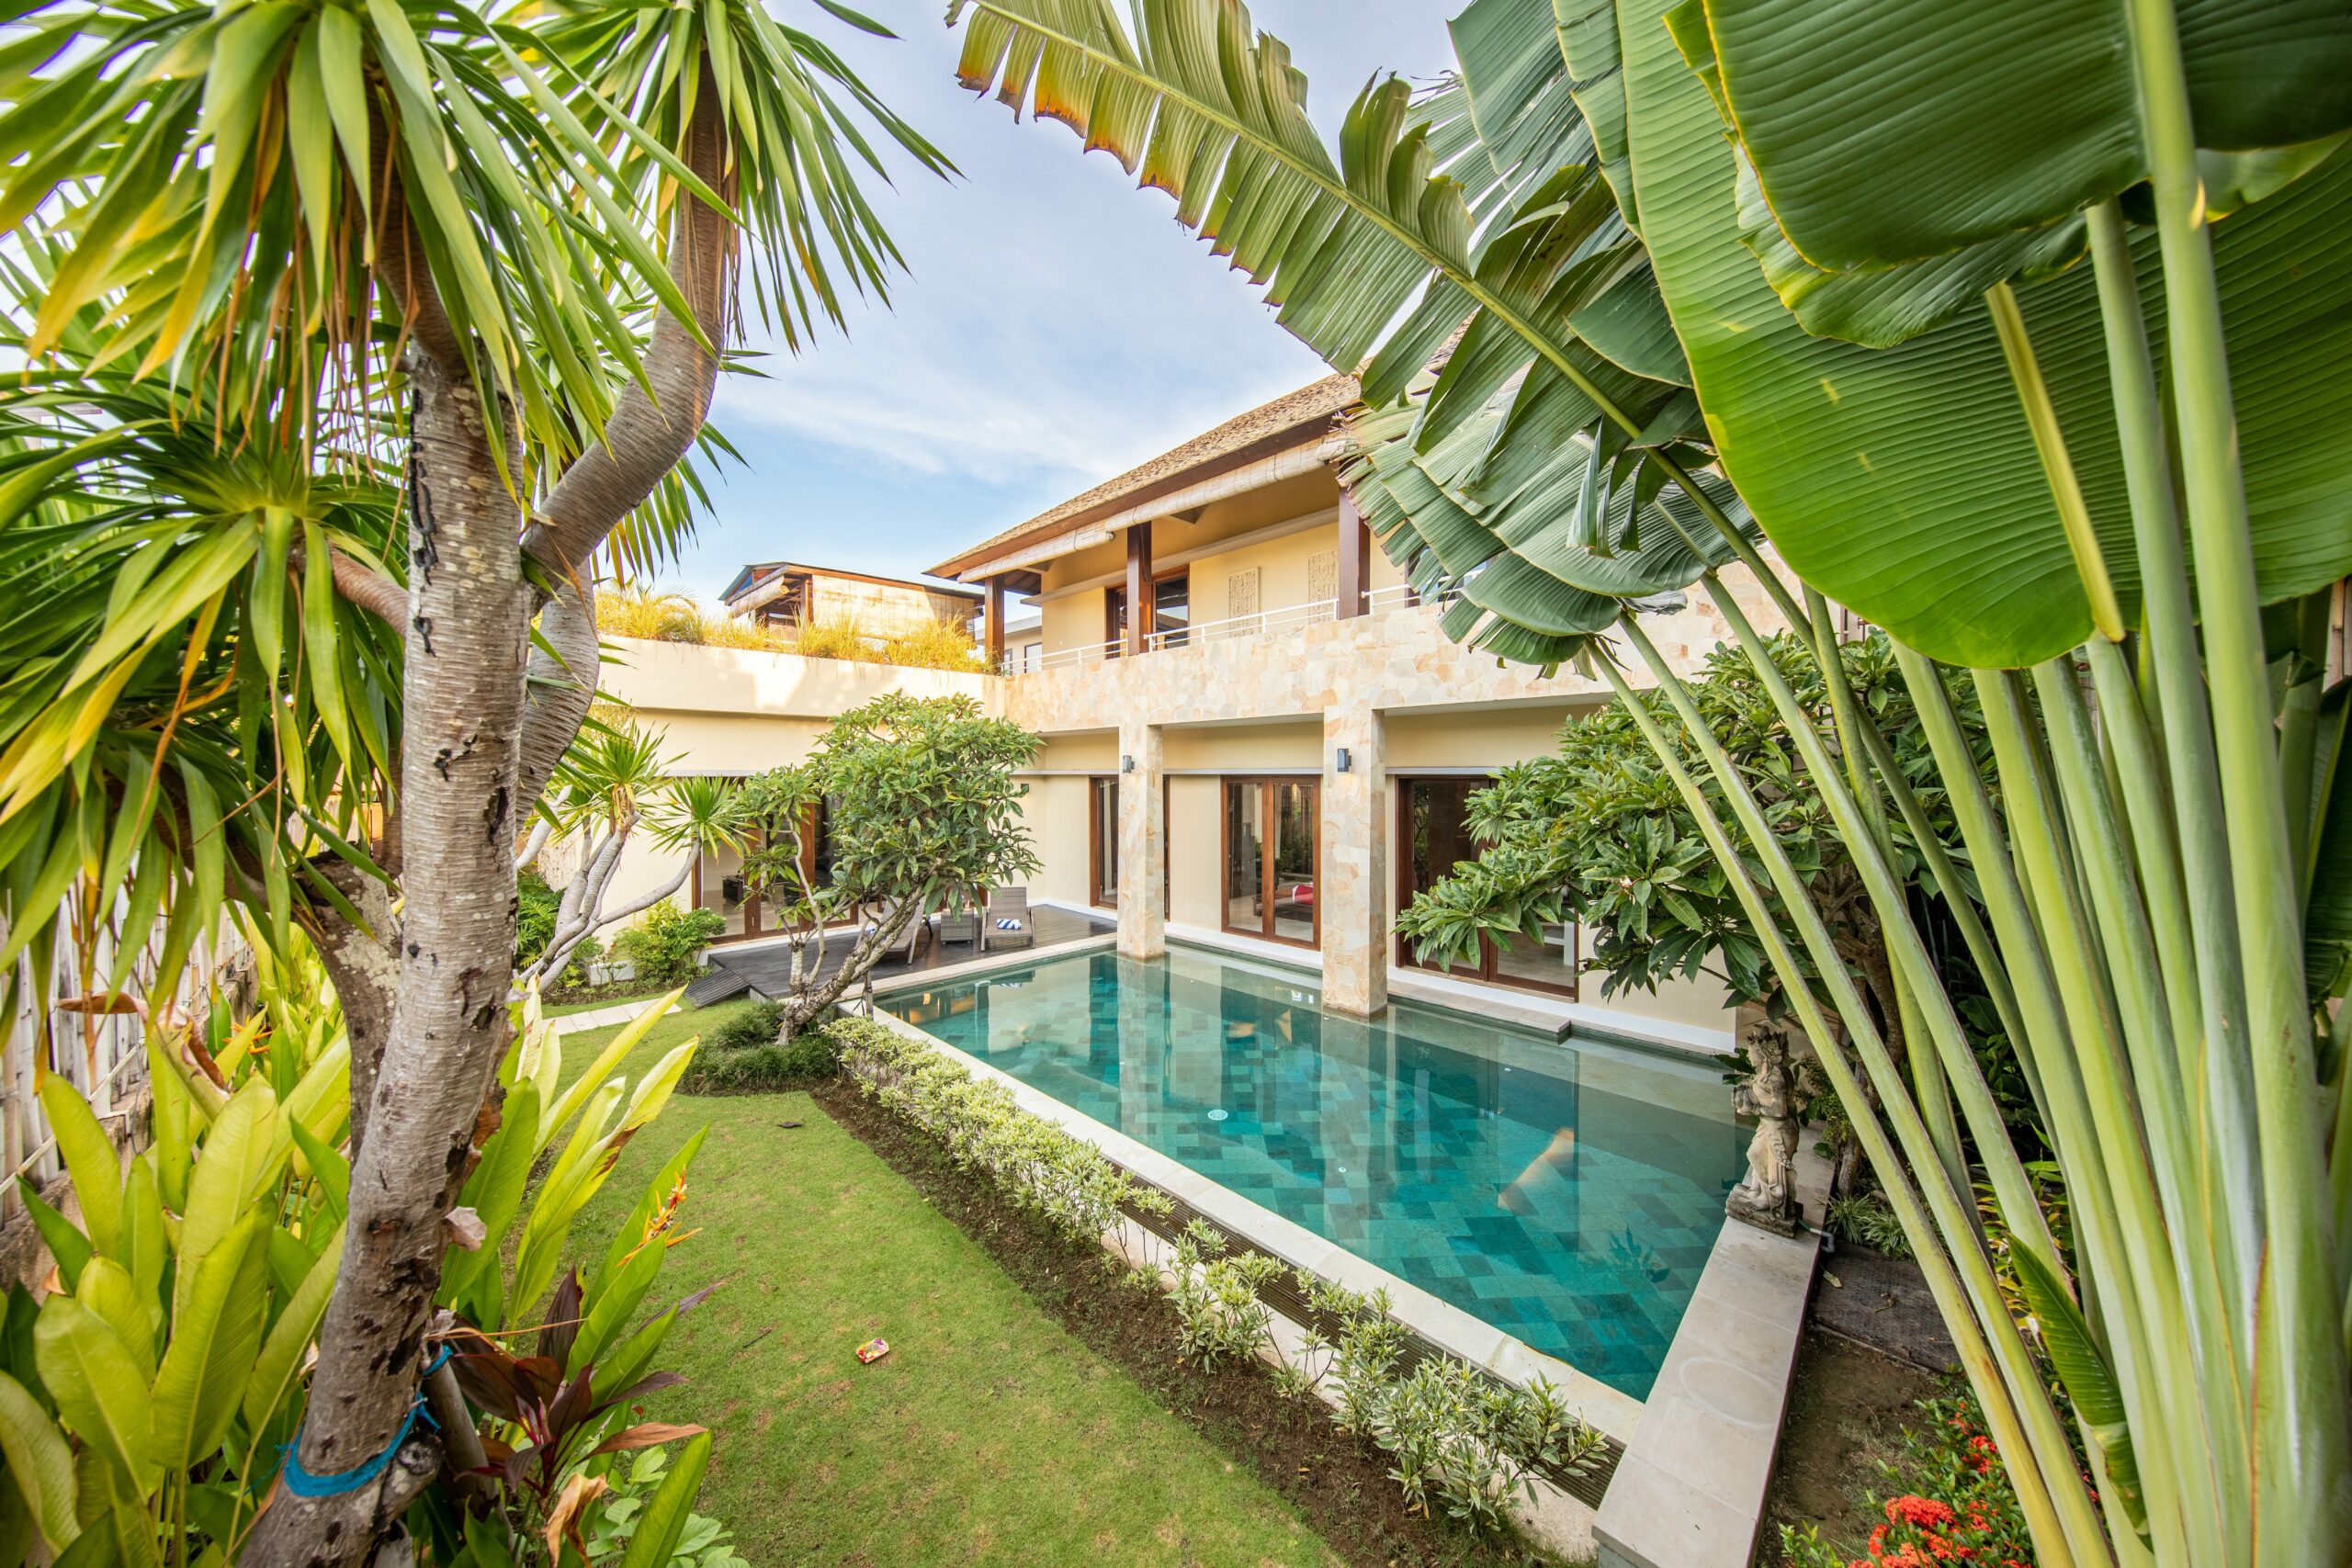 Airbnb in Bali | How To Start an Airbnb Rental Business in Bali